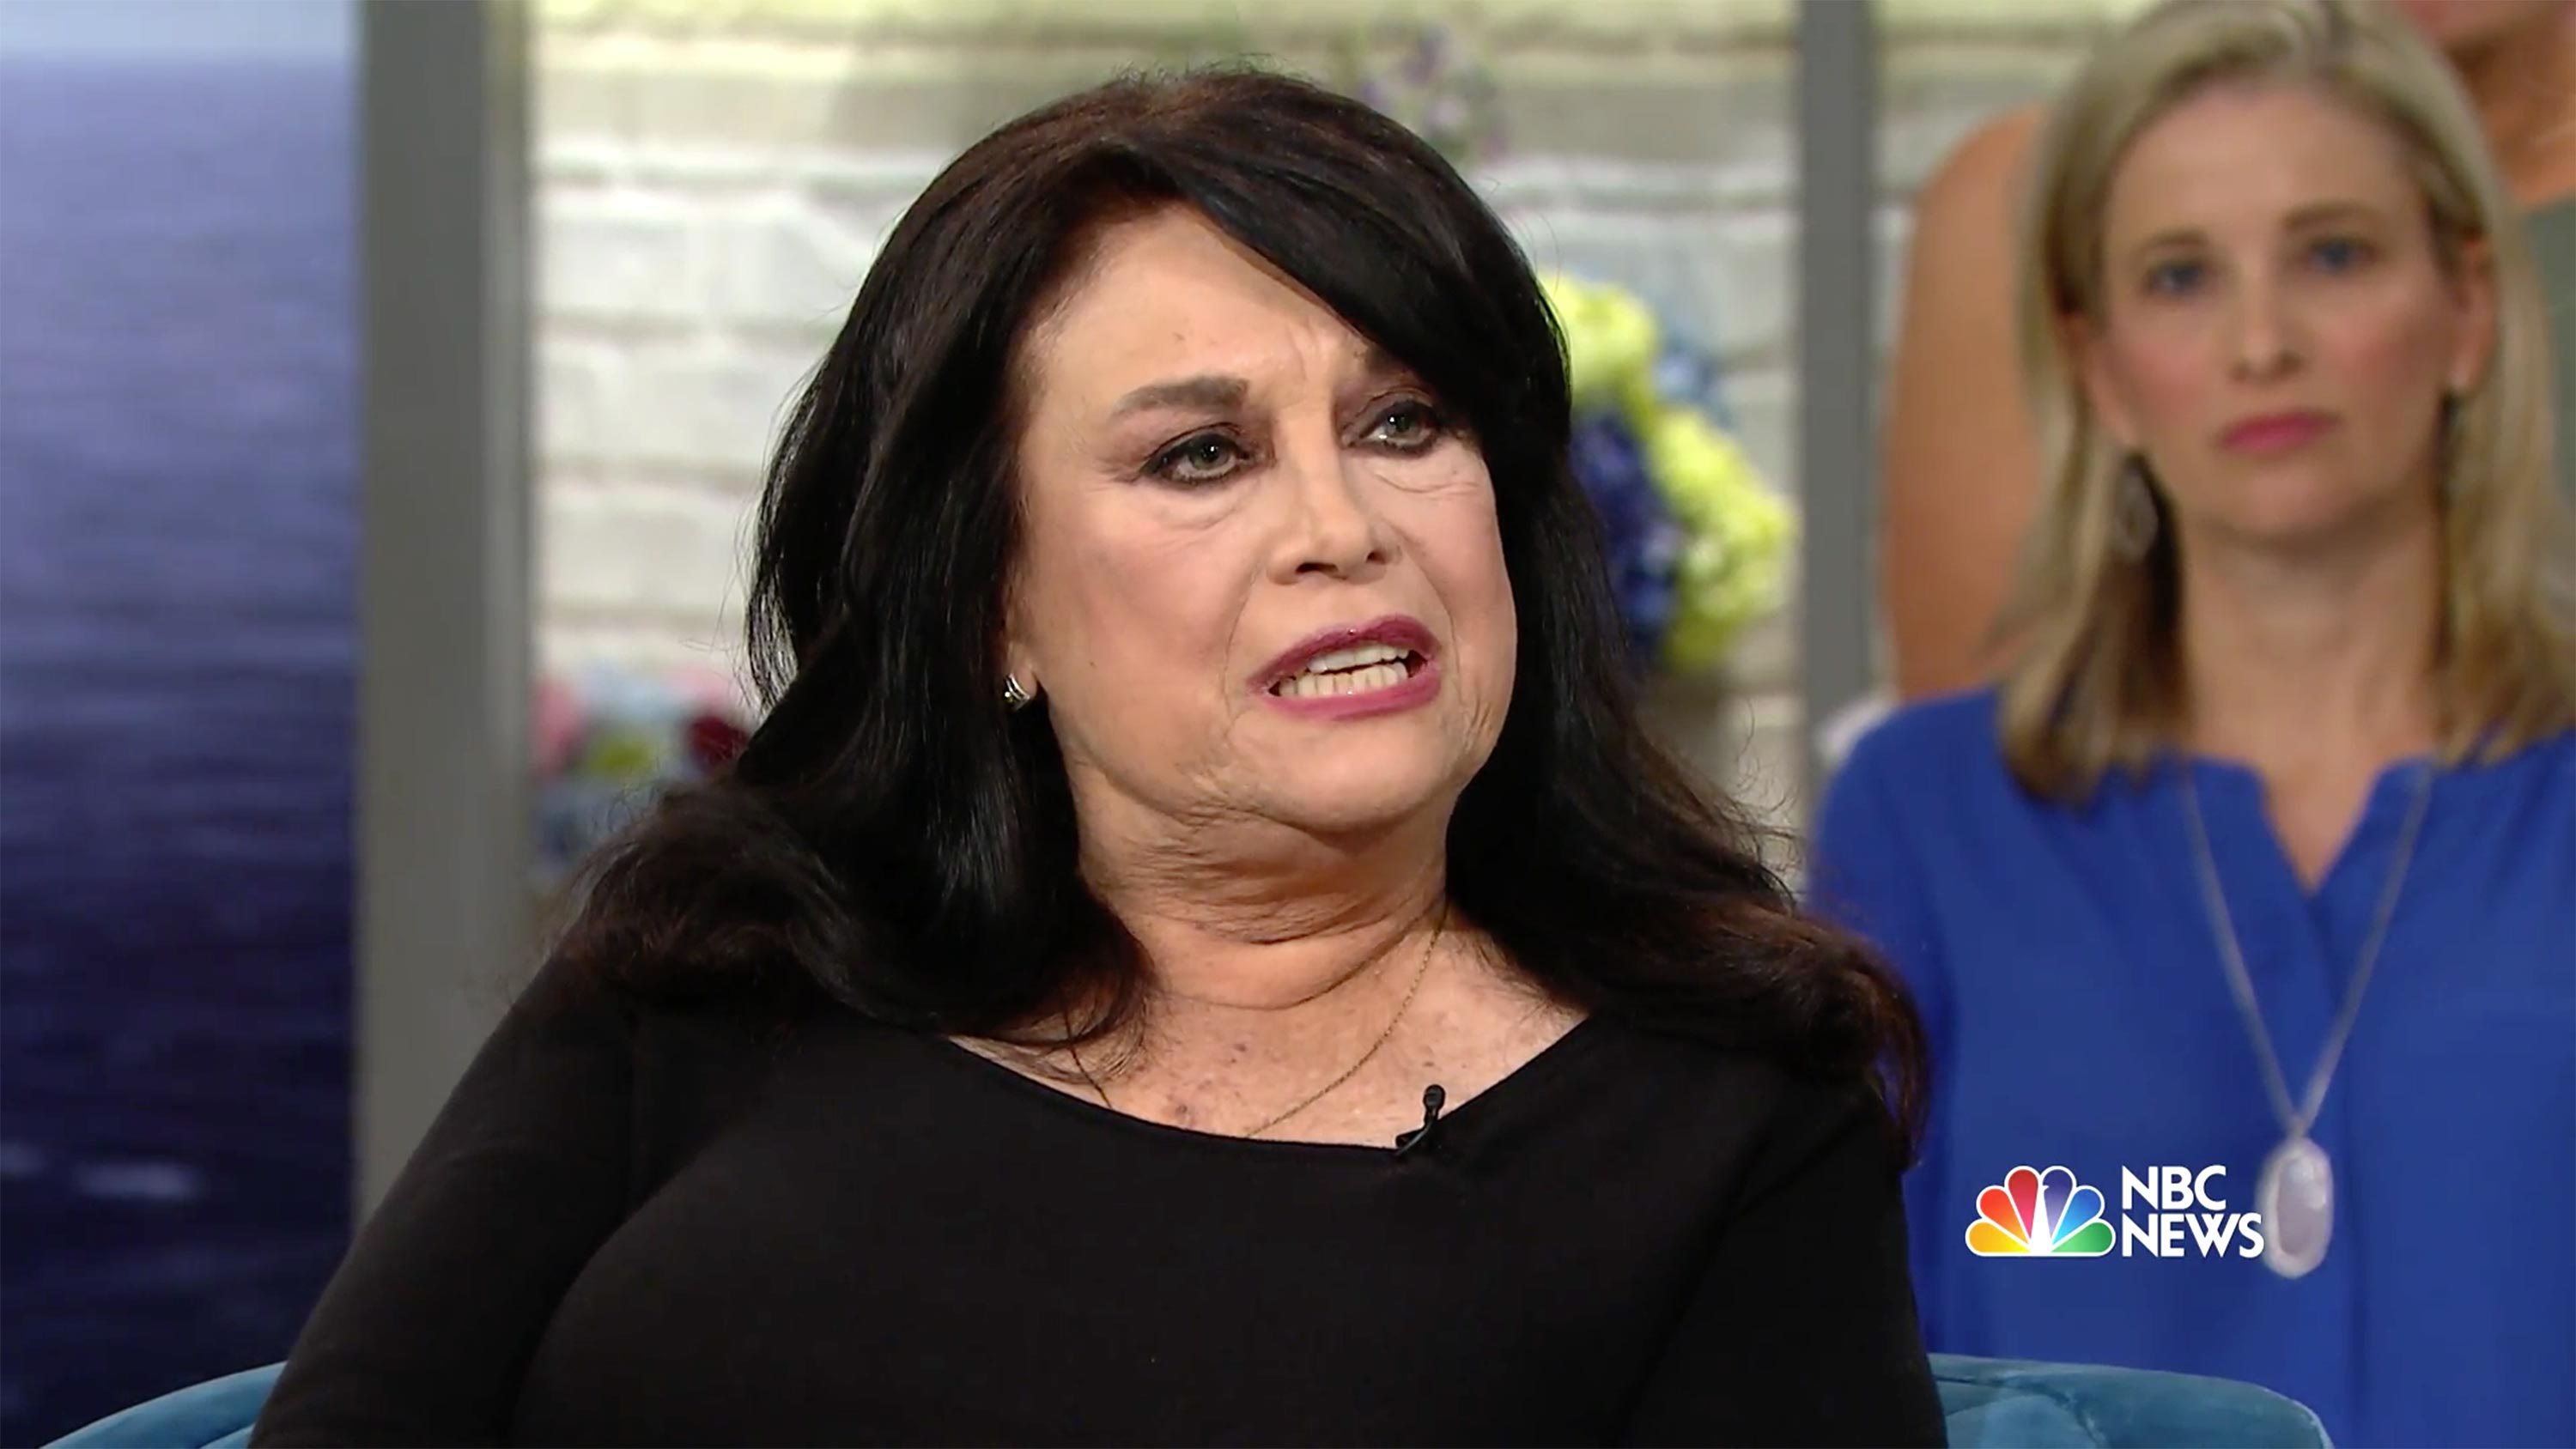 Lana Wood pushing for justice for her late sister